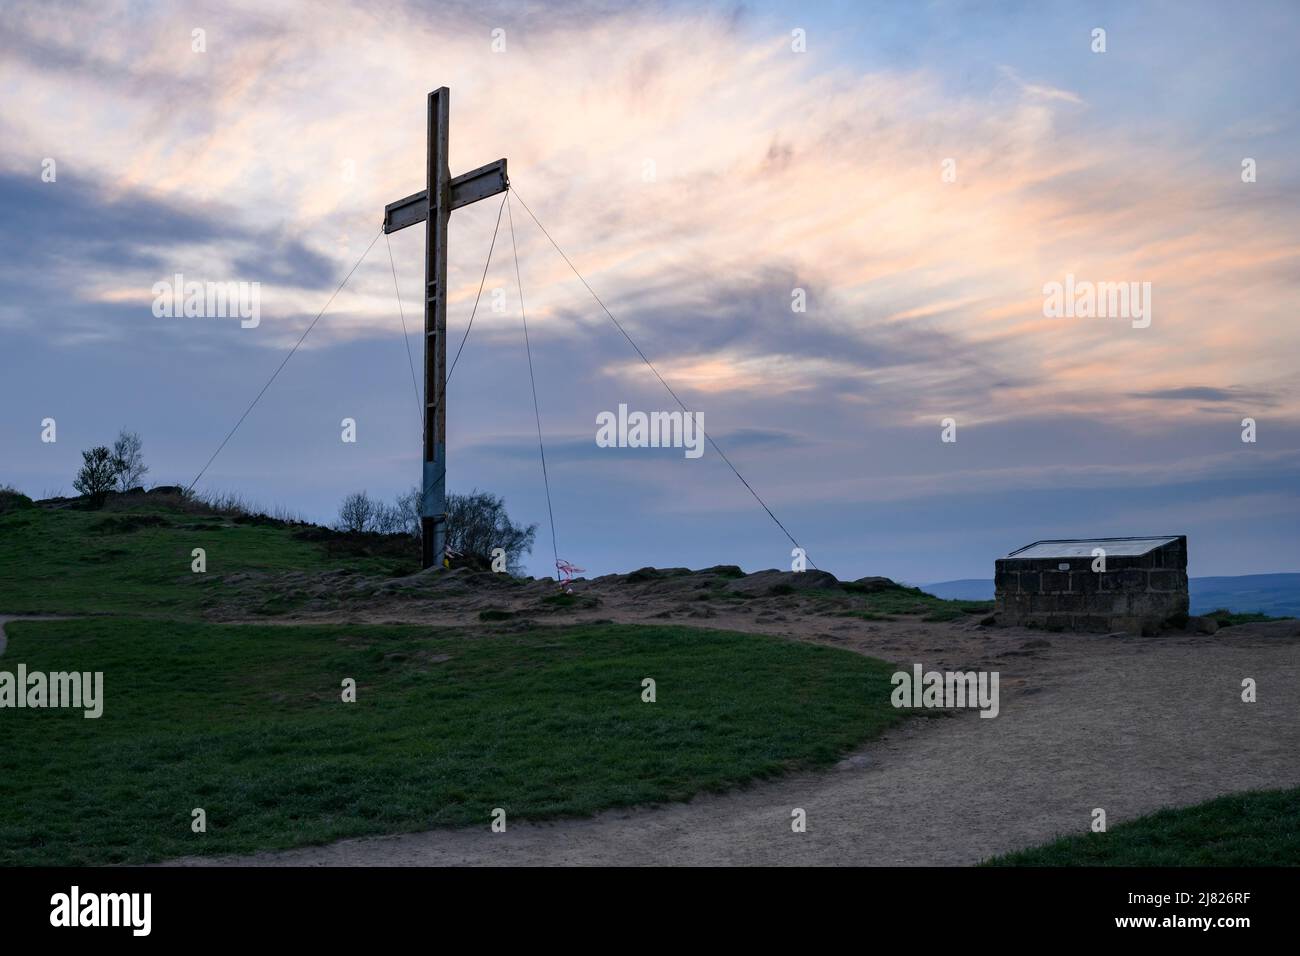 High towering wooden Easter cross (symbol of hope) held with ropes on hilltop & orange red sundown sky - The Chevin, Otley, West Yorkshire England UK. Stock Photo